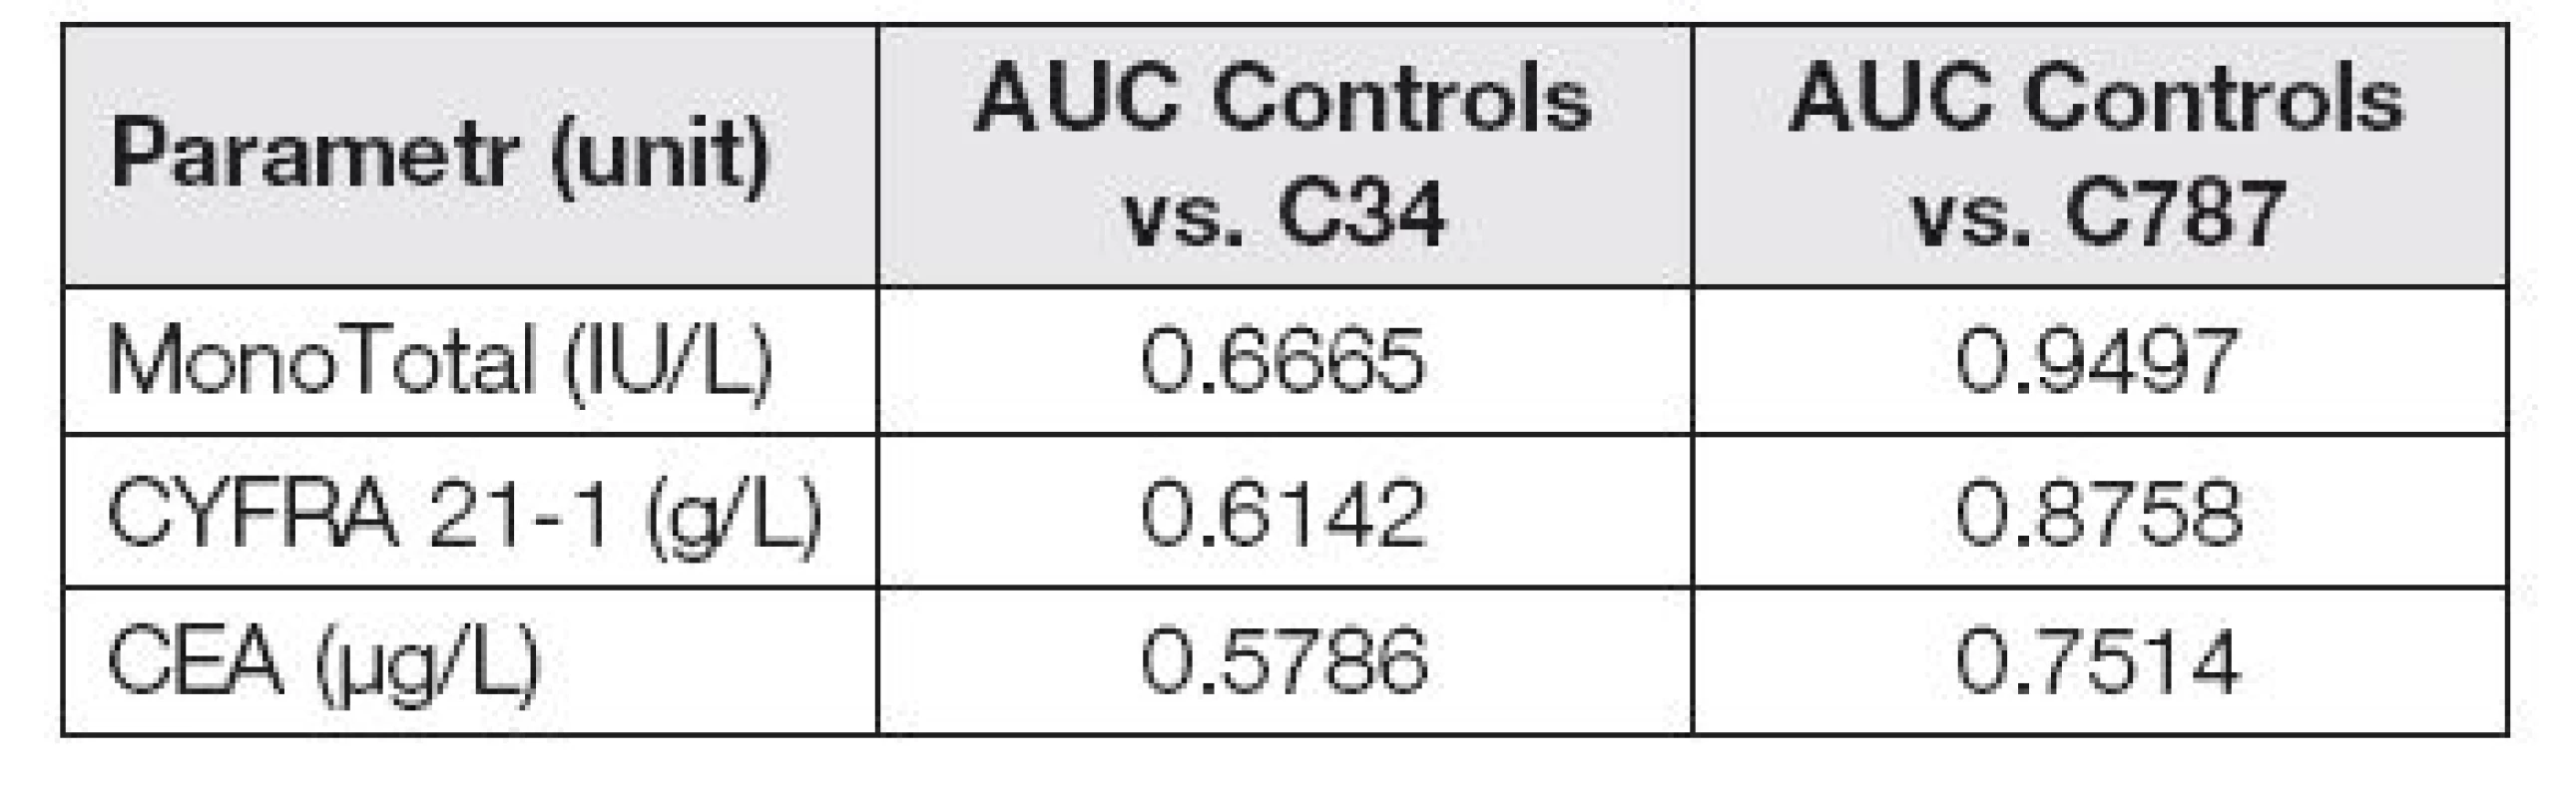 AUC of tumor markers in control group vs. C34 and C787